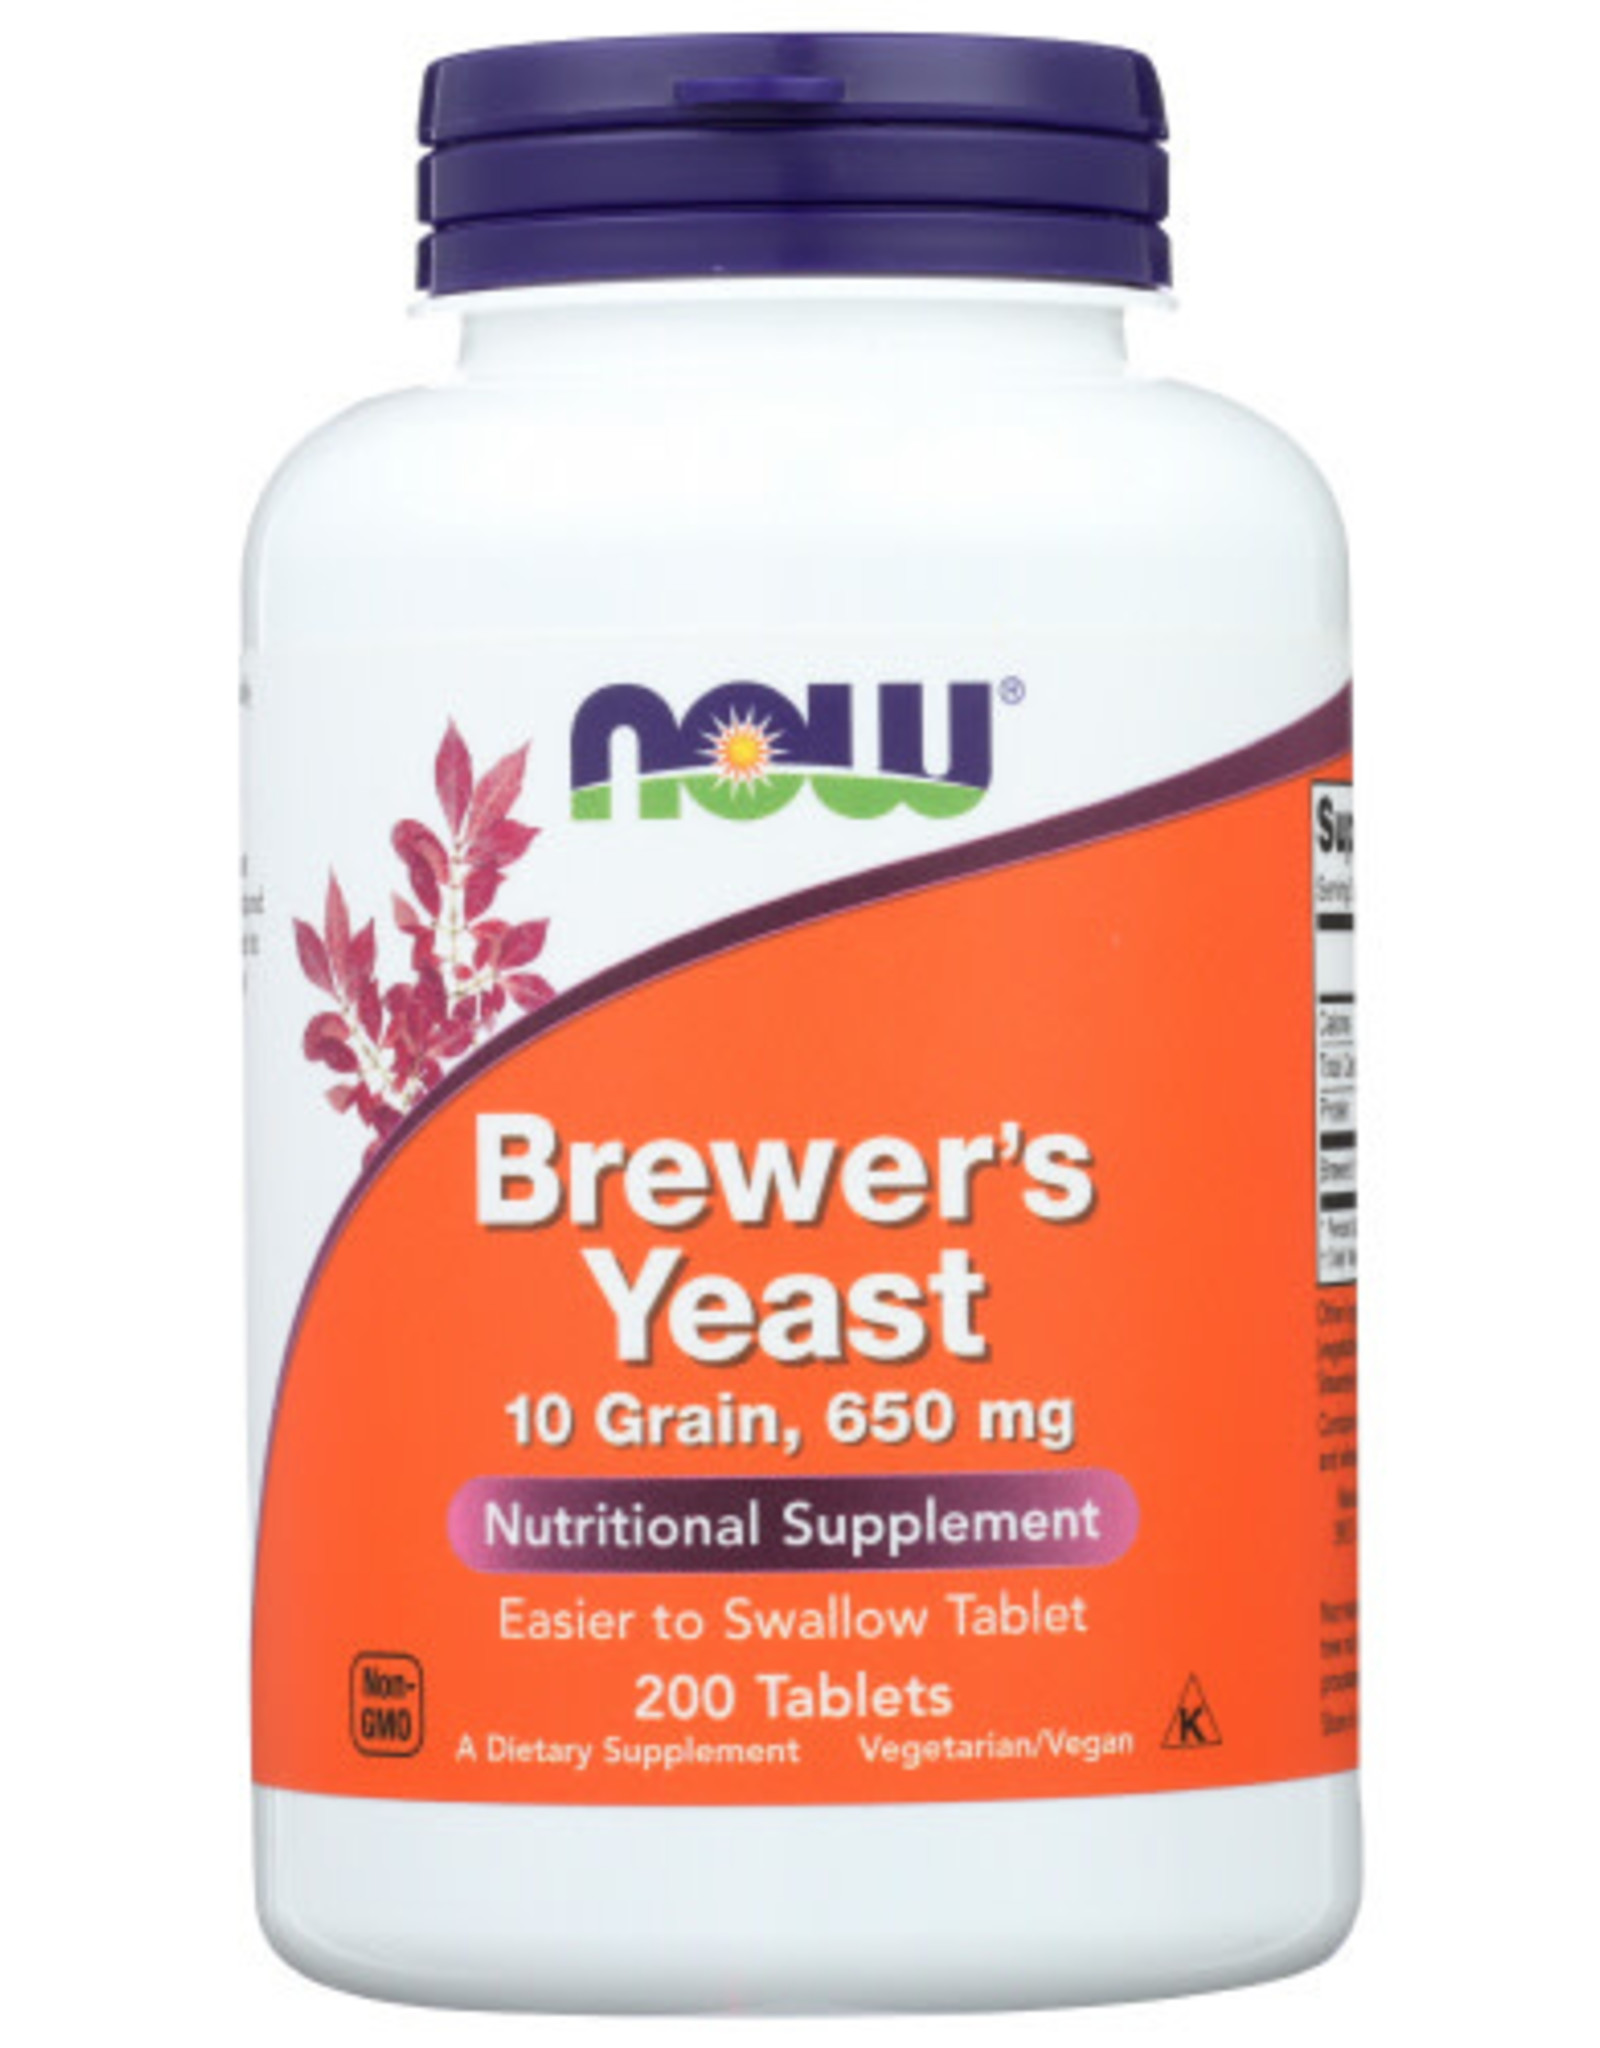 NOW FOODS NOW BREWER'S YEAST 10 GRAIN, 650 MG. NUTRITIONAL SUPPLEMENT, 200 COUNT